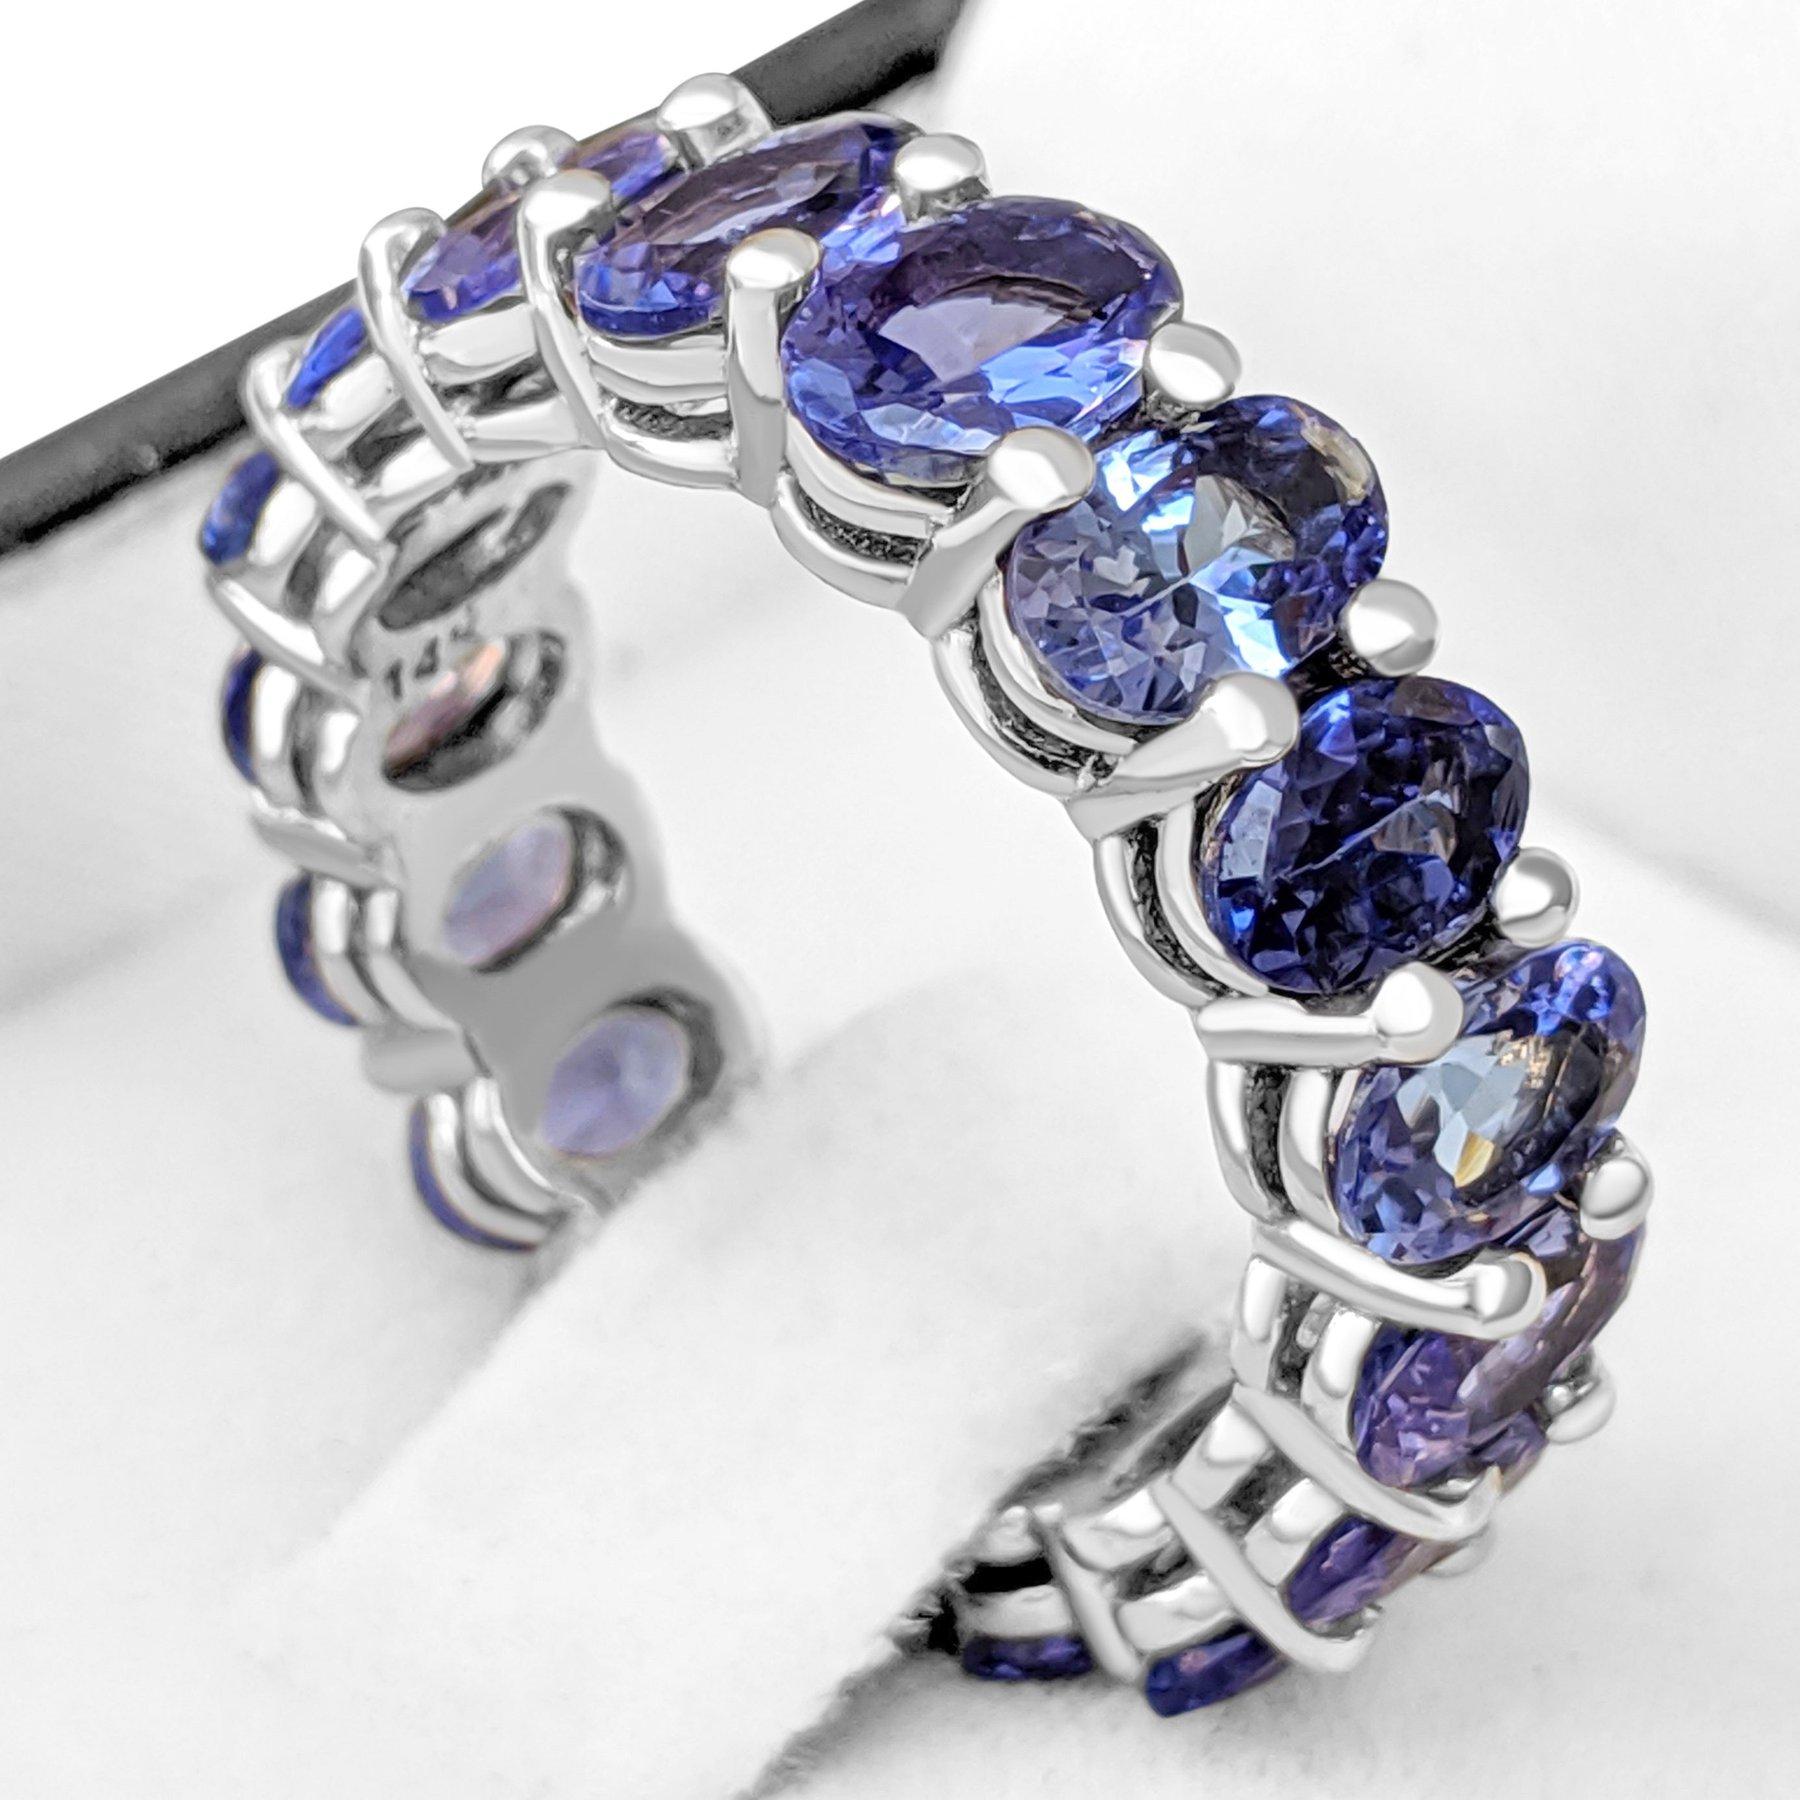 Oval Cut $1 NO RESERVE! 8.22 Carat Tanzanite Eternity Band - 14 kt. White Gold - Ring